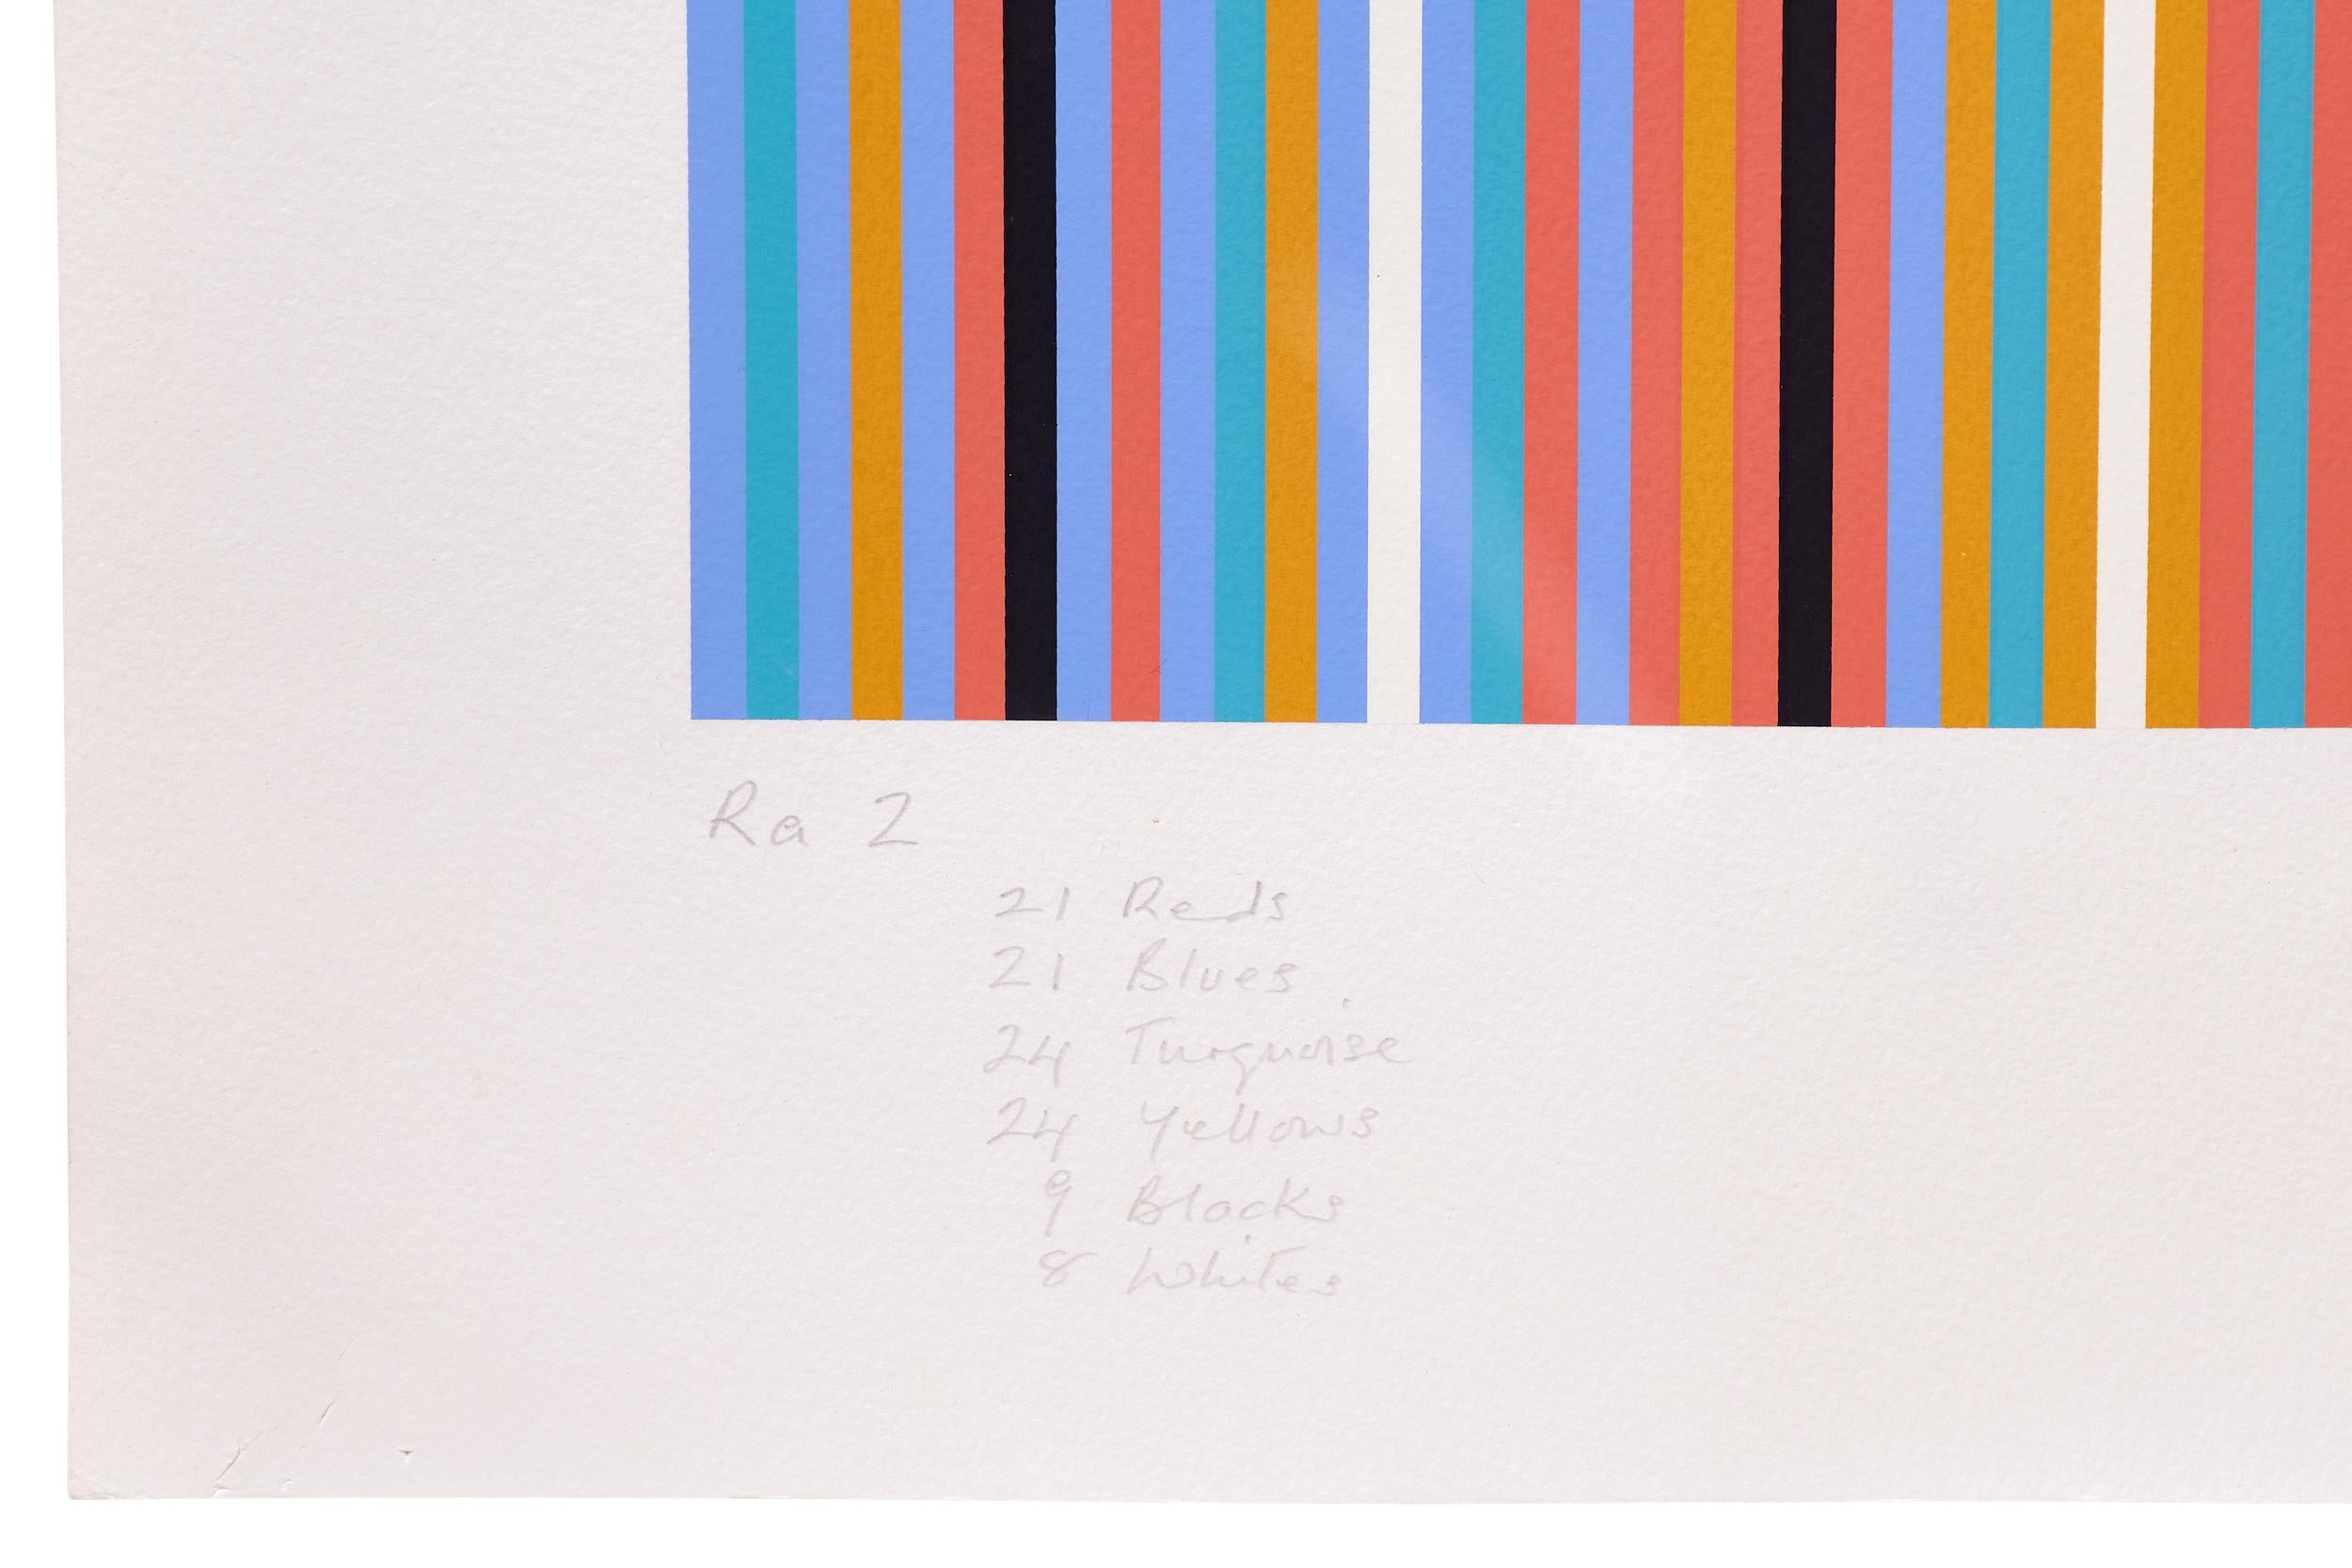 RA 2 -- Print, Coloured Lines, Abstract, Op Art by Bridget RIley - Gray Abstract Print by Bridget Riley